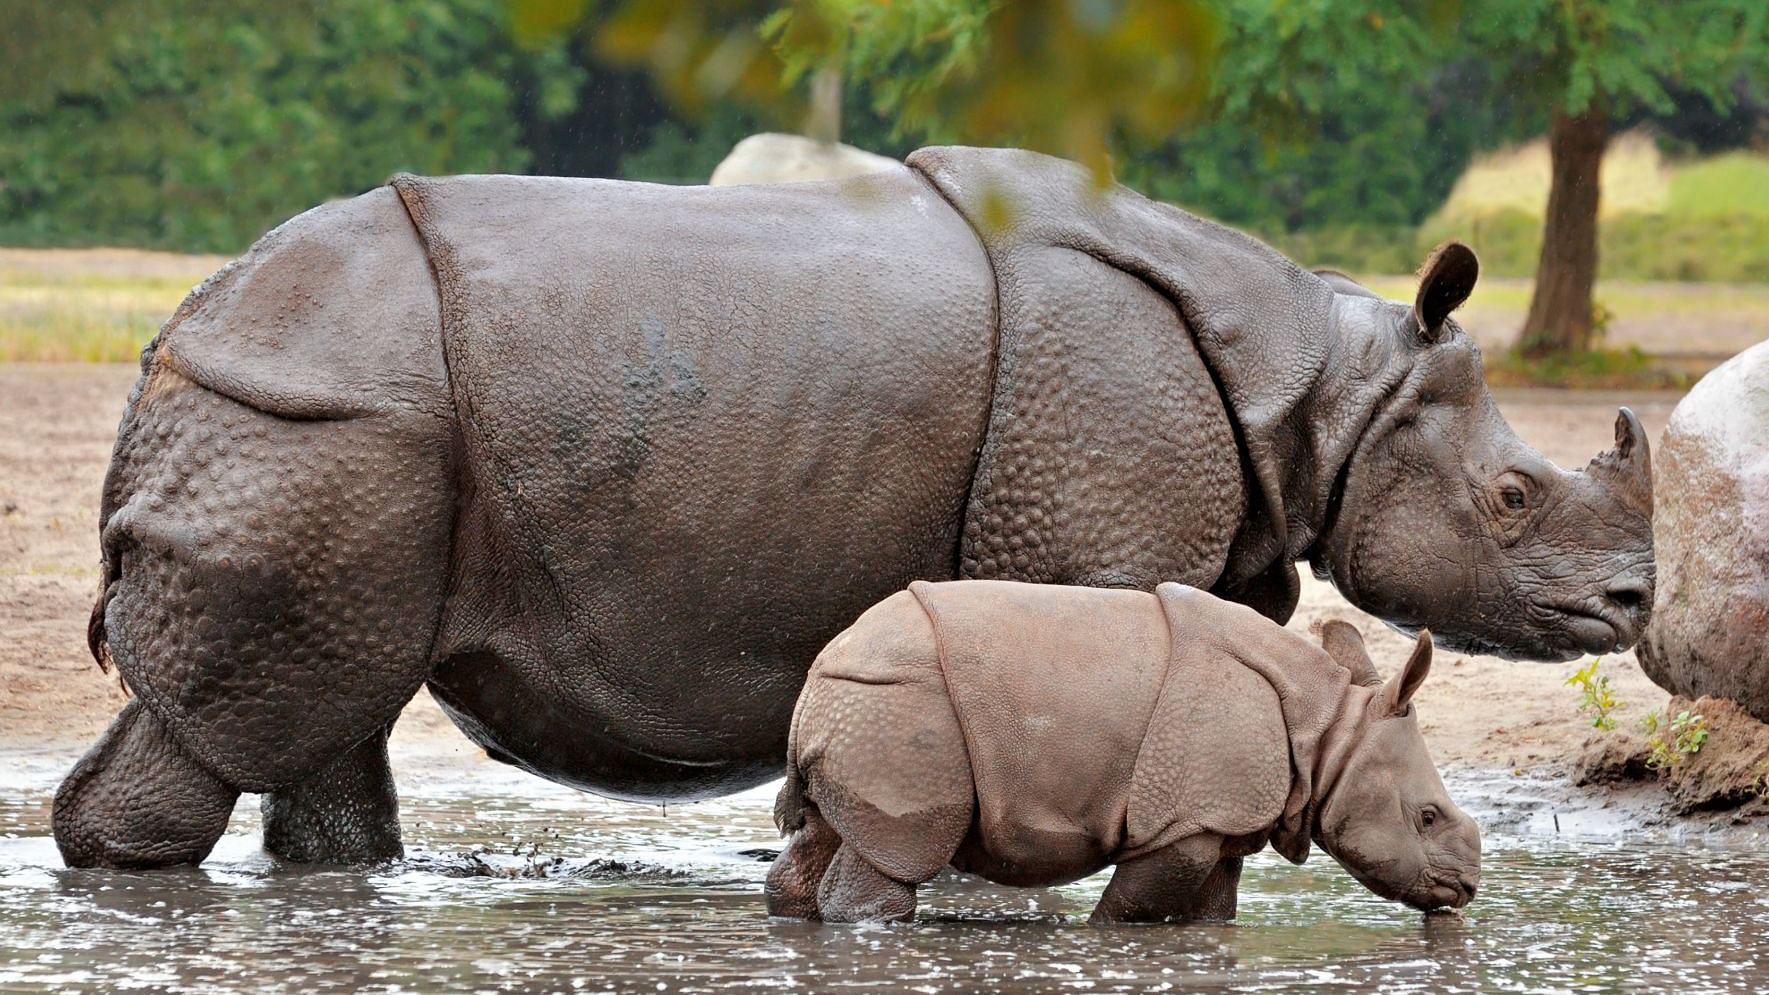 The great one-horned Rhinoceroes.